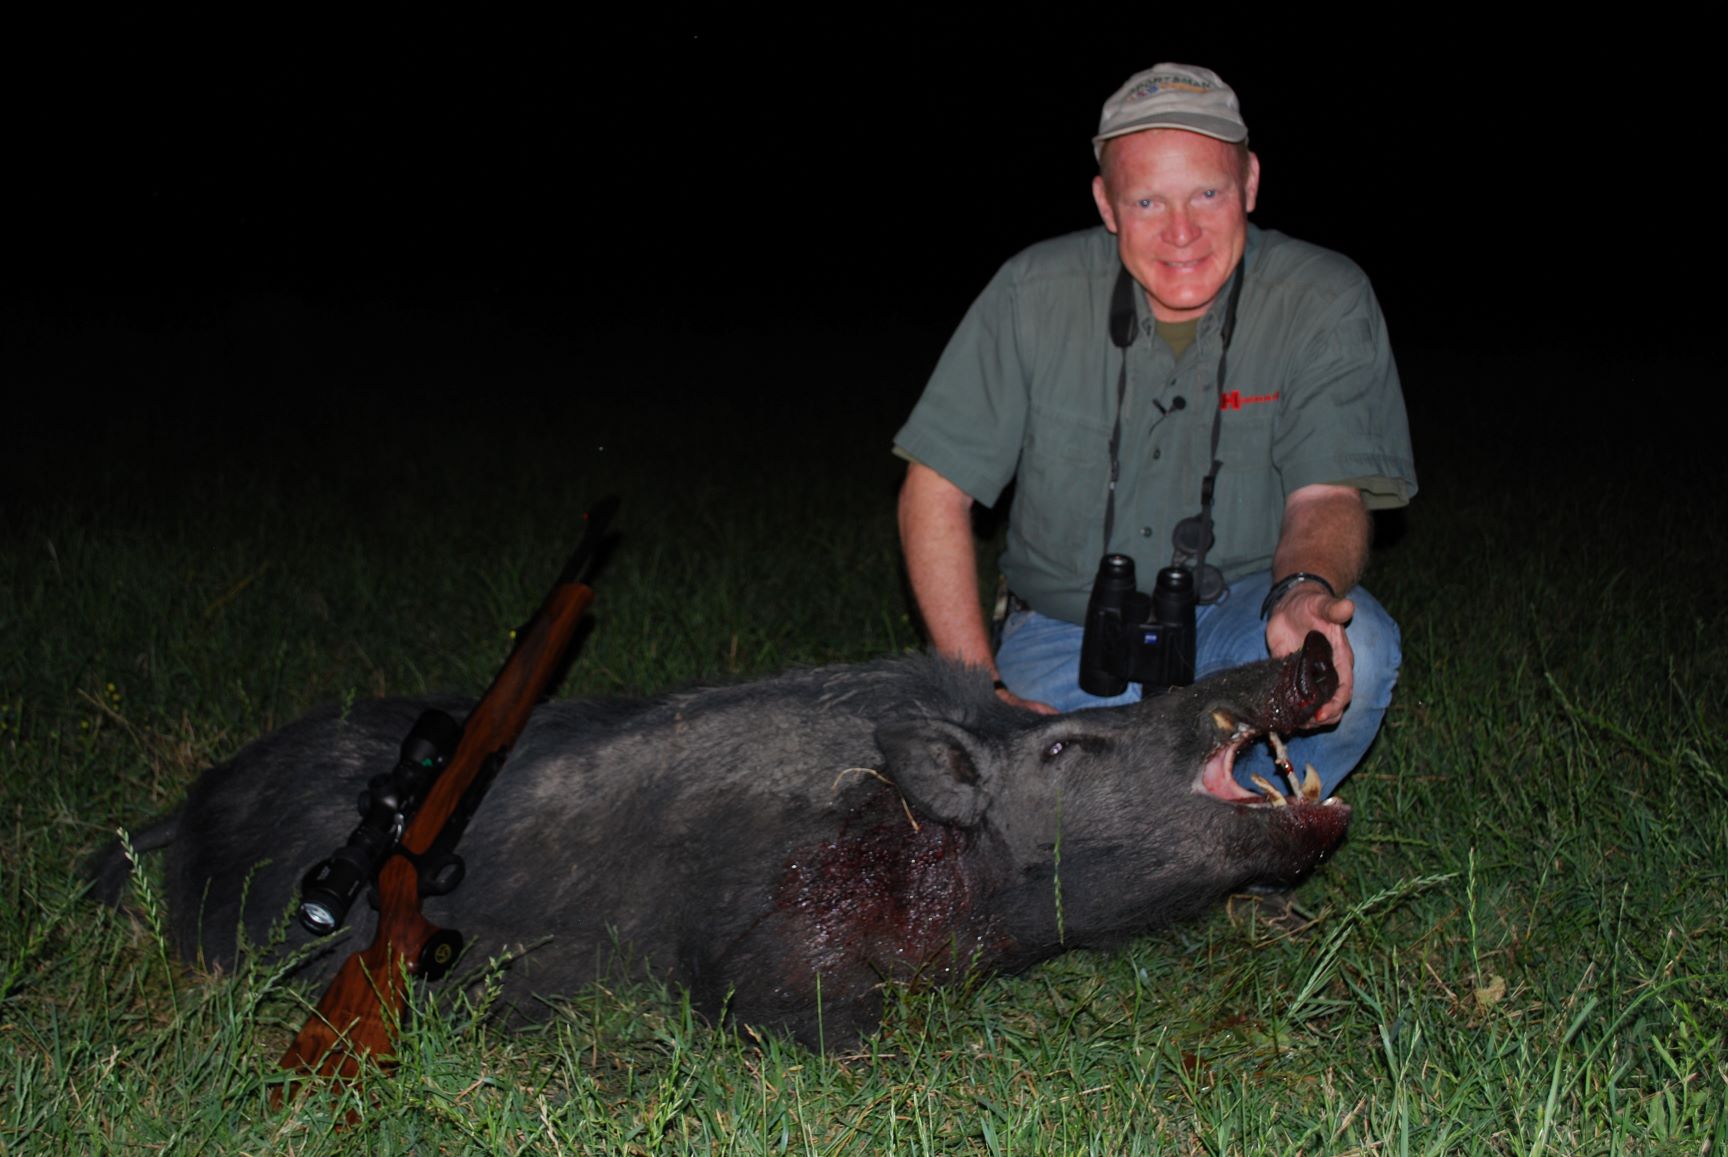 Because of required action length, semiautomatic sporters in .30-06 are fairly uncommon. One of them is the Sauer 303, used to take this big Texas boar at last light.